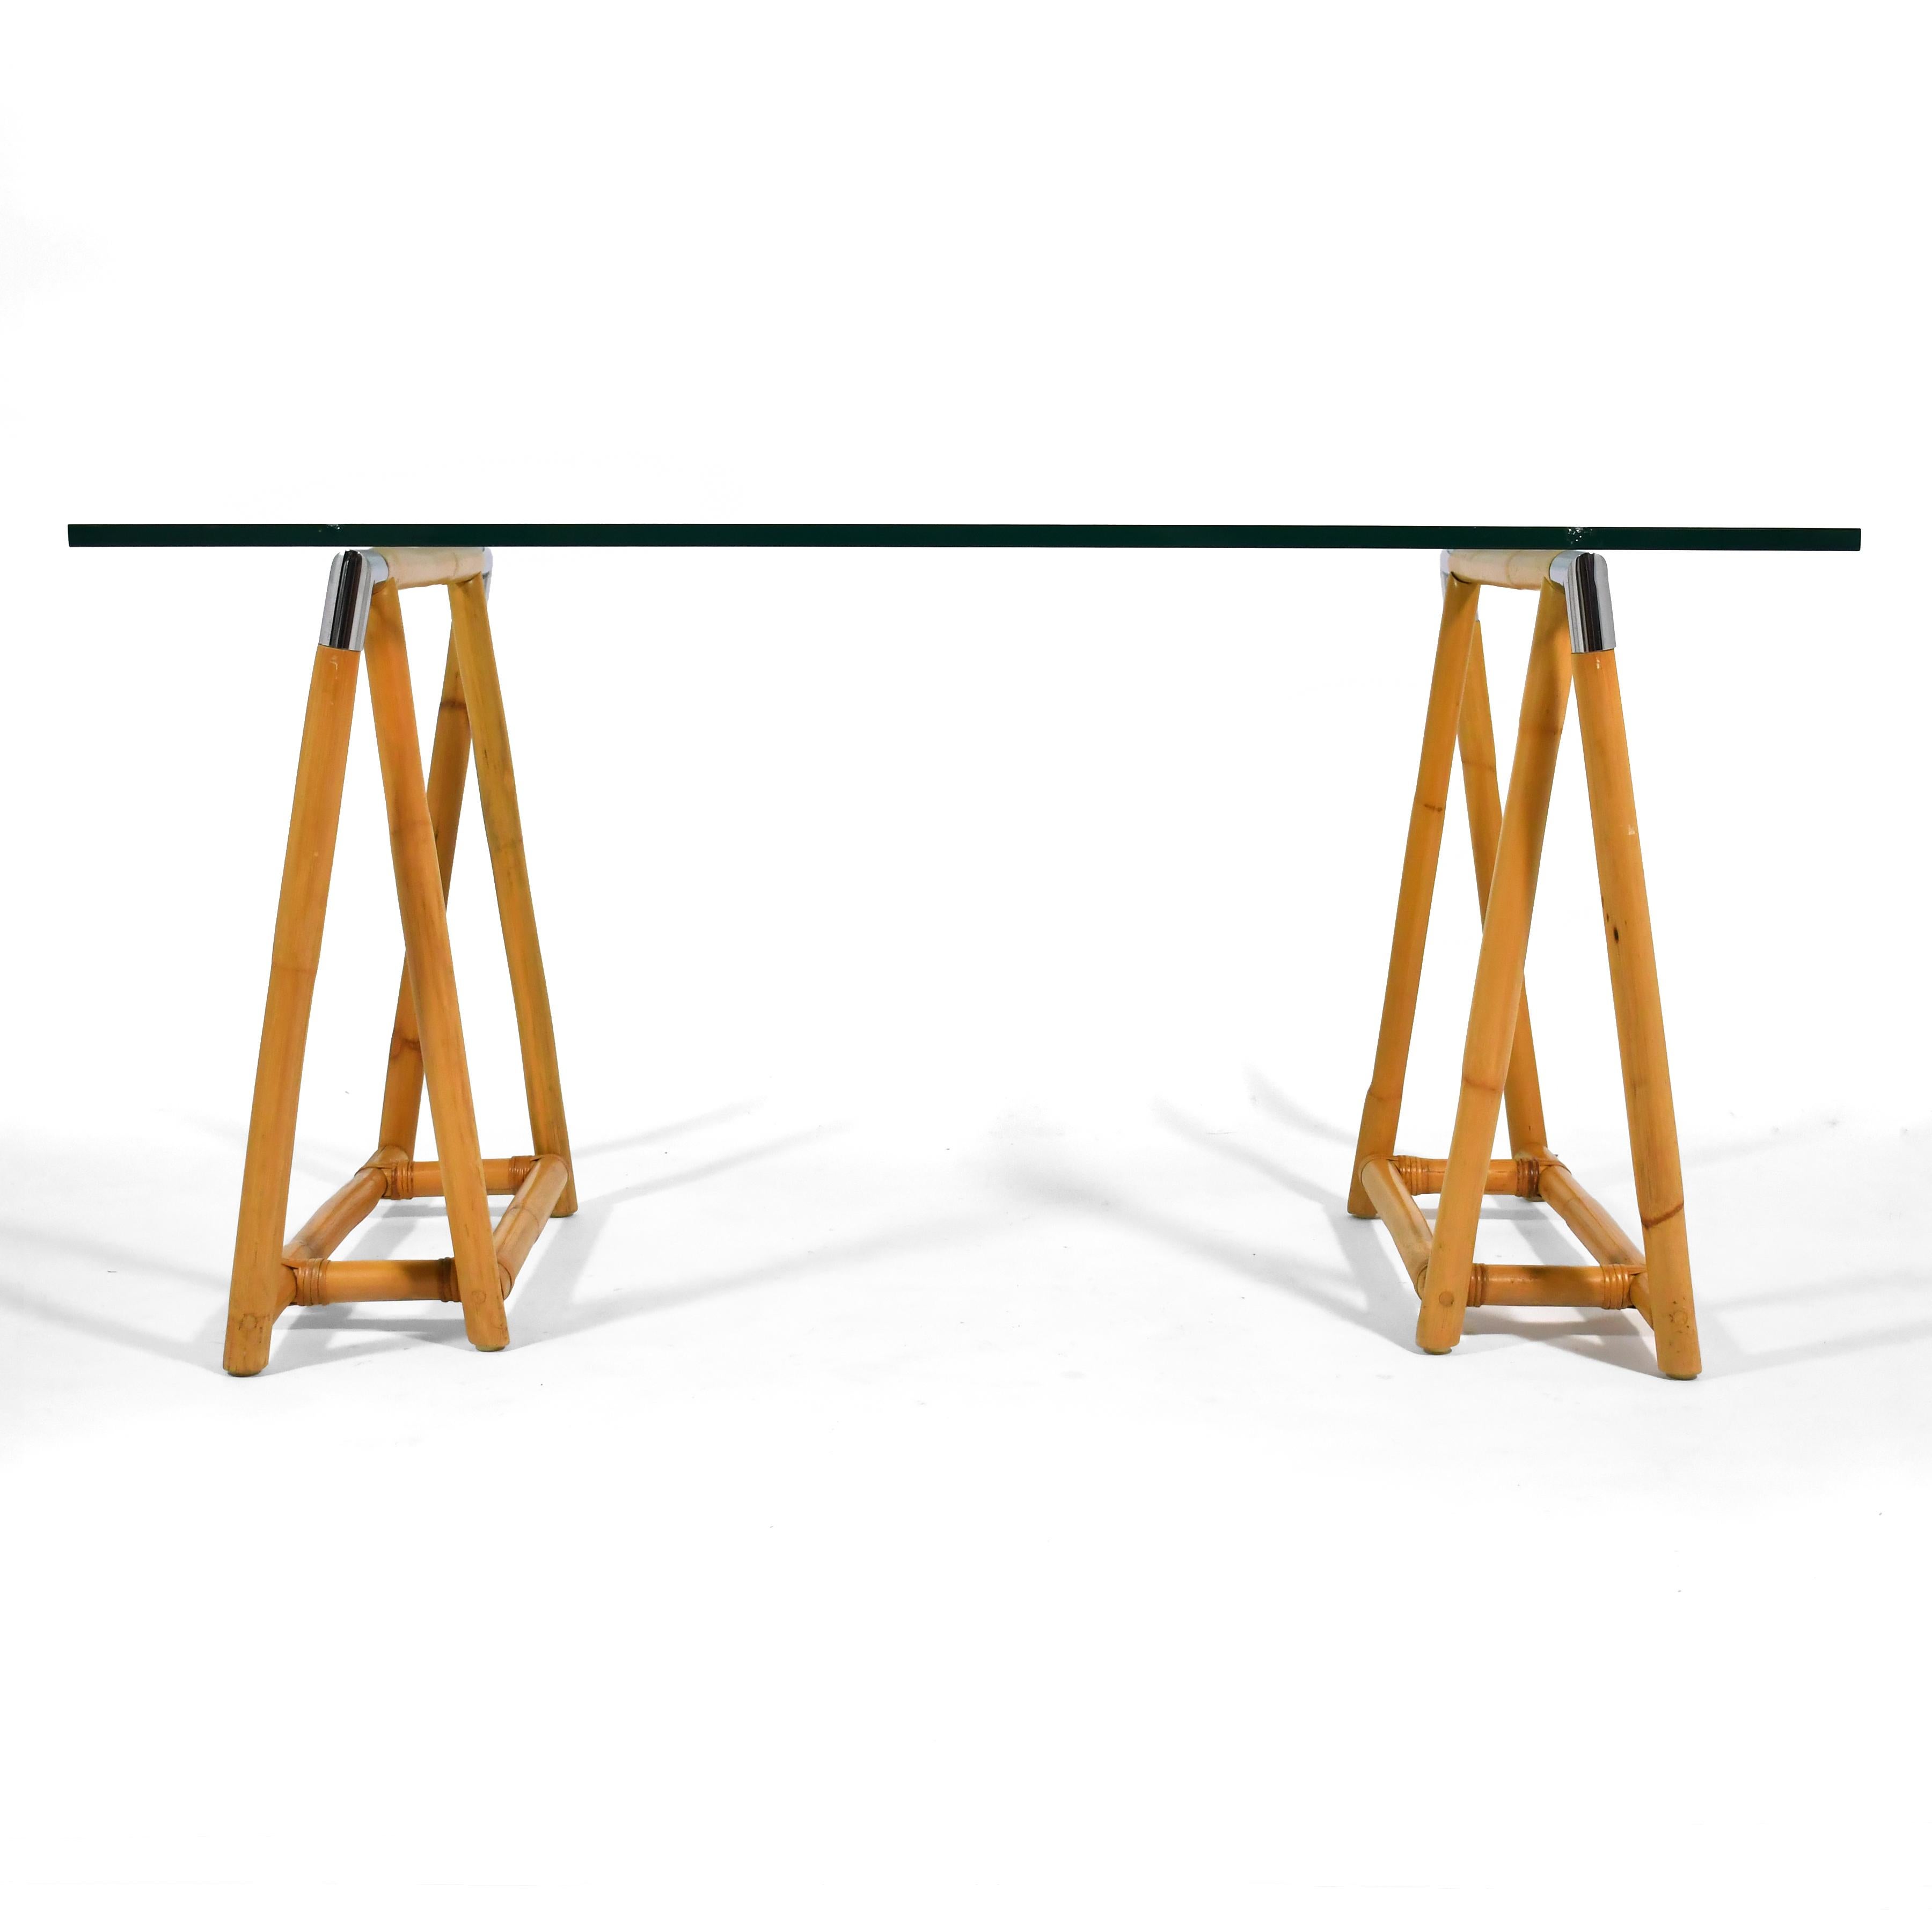 Rattan & Chrome Sawhorse Table / Desk Bases In Good Condition For Sale In Highland, IN